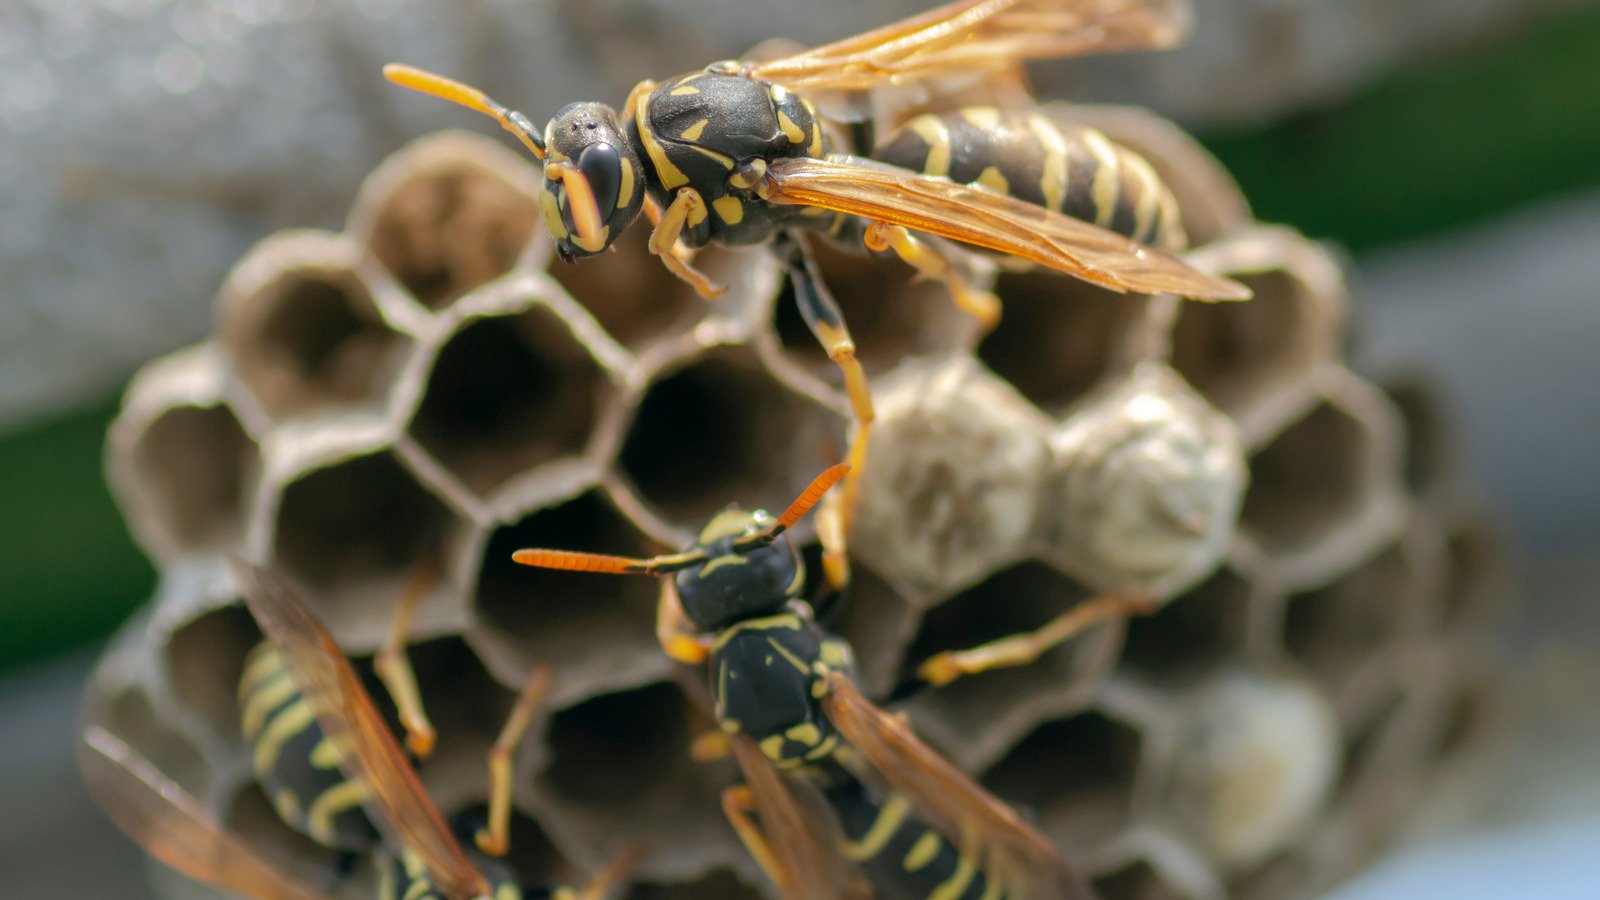 An Expert Explains The Safest Way To Remove A Wasp's Nest From Your Home – Exclusive